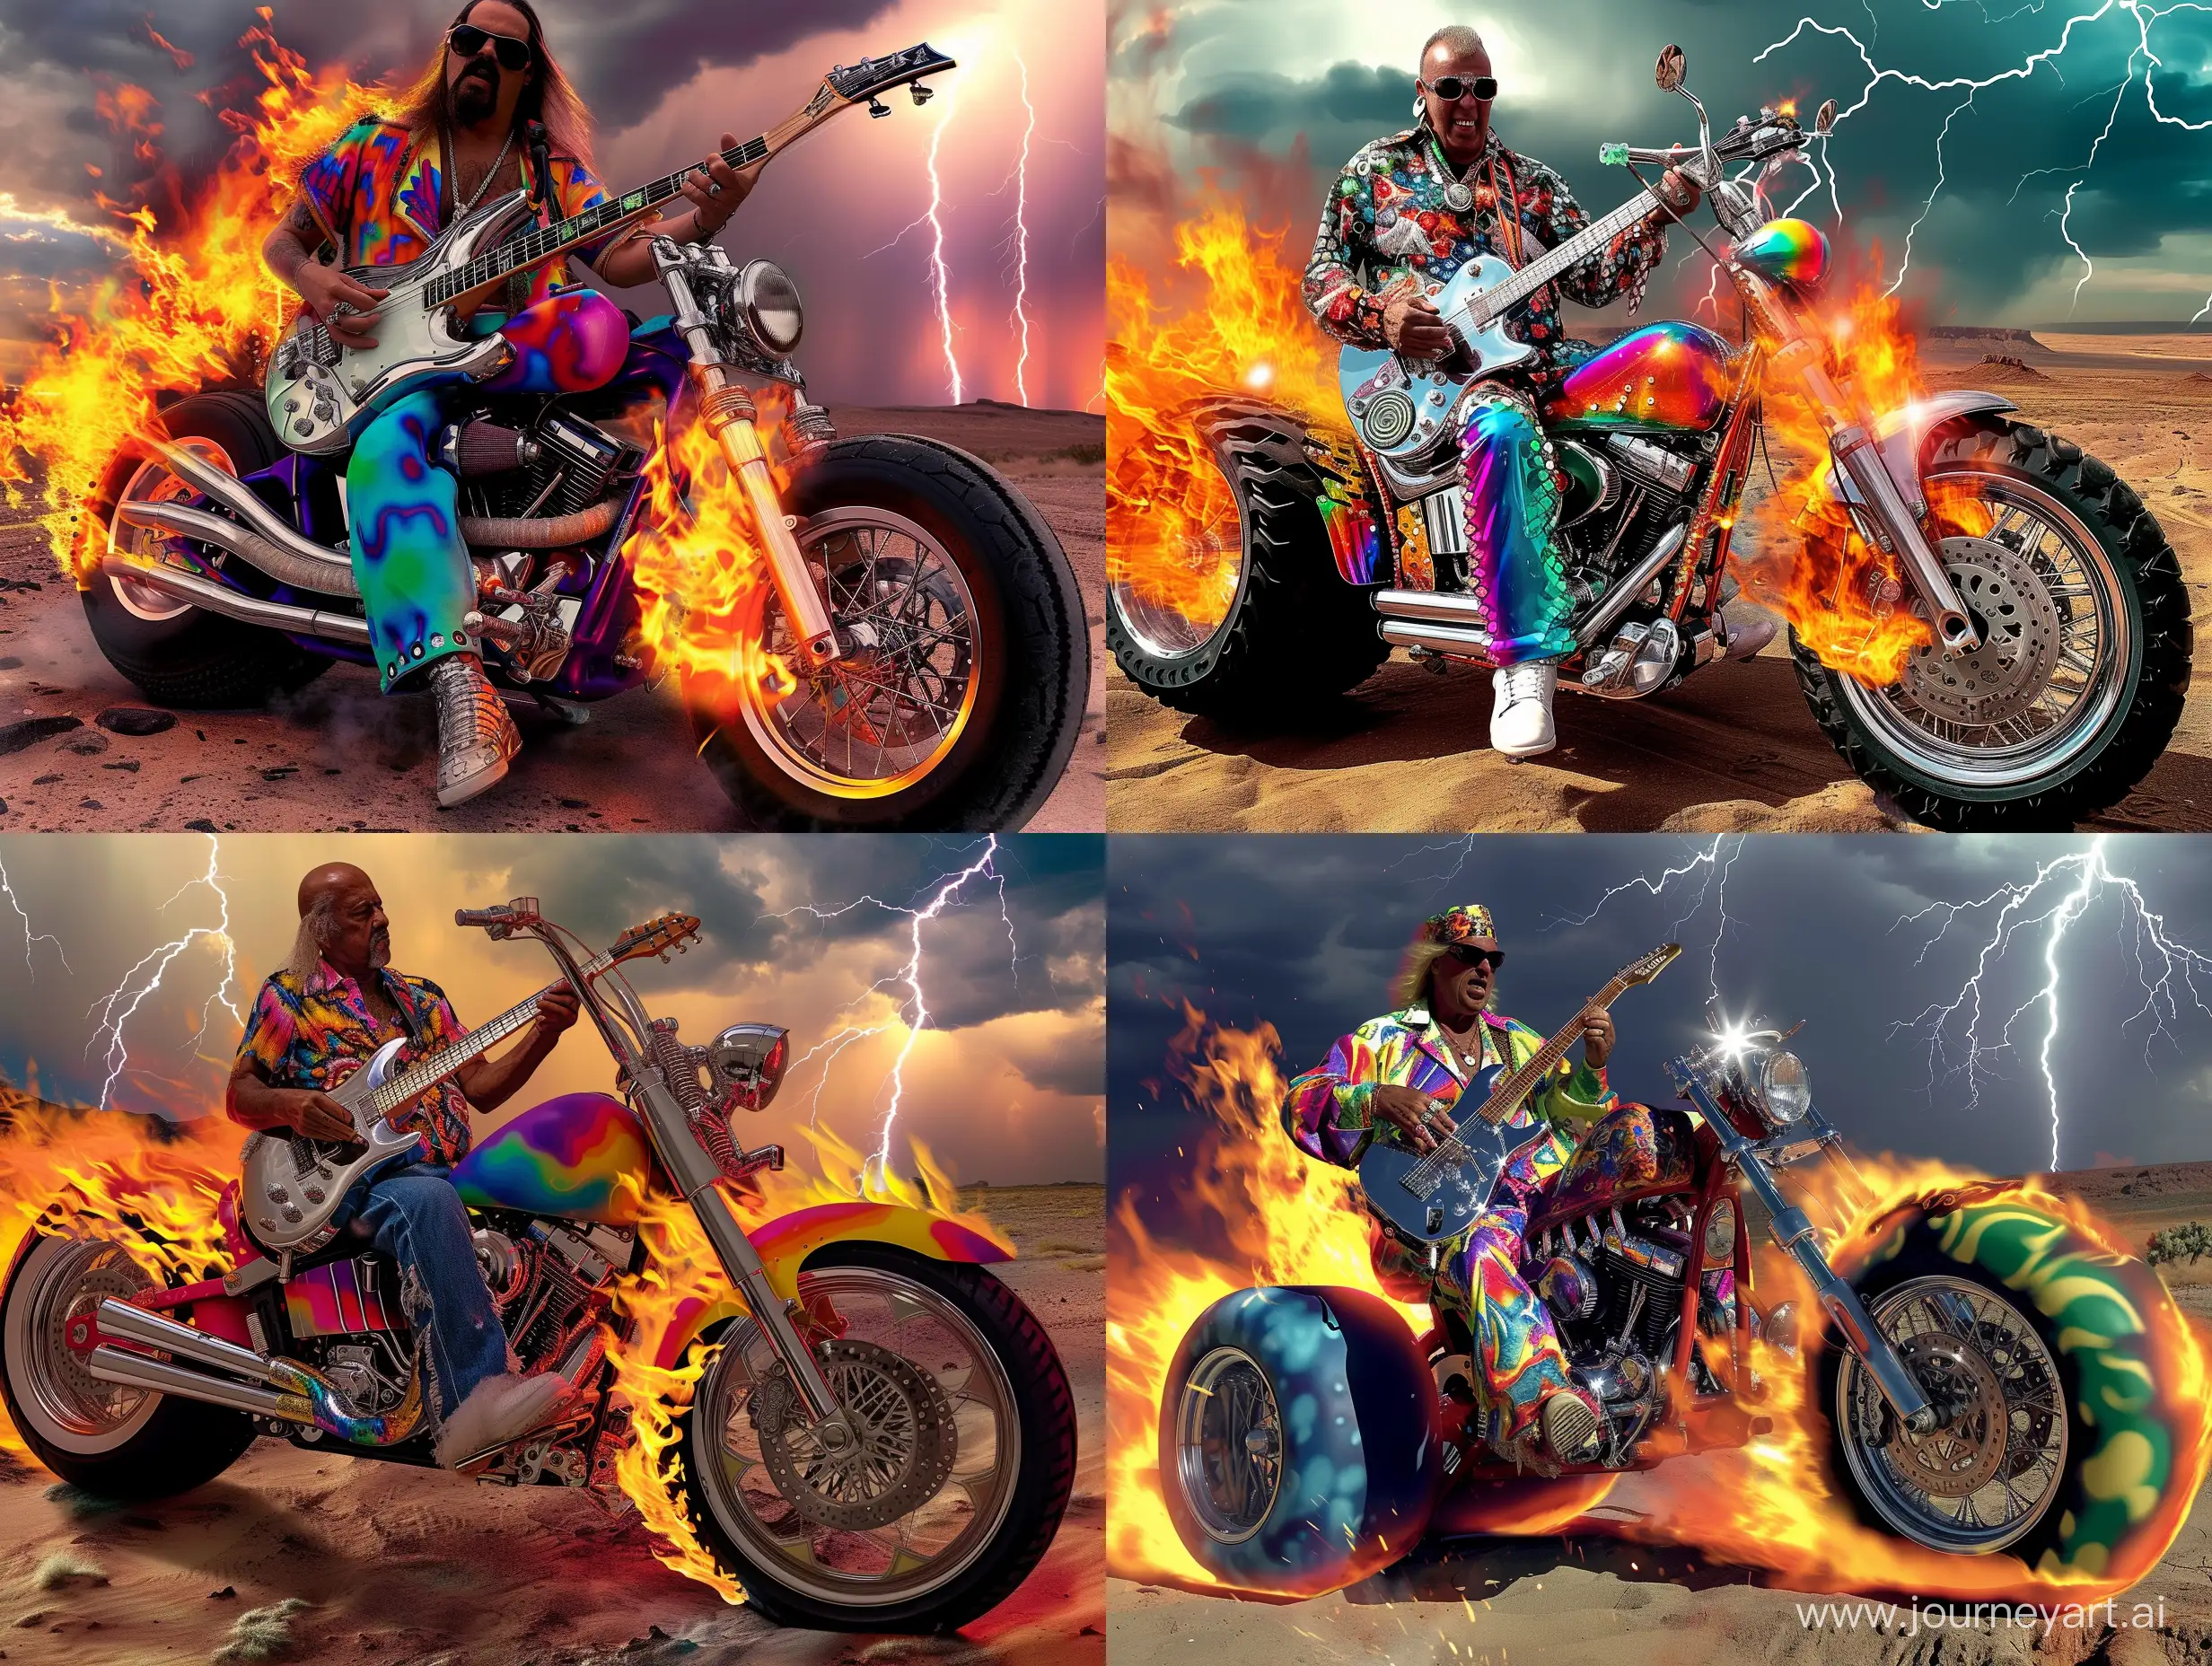 A rock and roll guitarist is playing a chrome guitar. He is sitting on a fire engulfed, colorful, custom motorcycle, with oversized tires and chrome spoke rims. A brilliant desert sky with  multiple lightning bursts, is covering the landscape. The camera is in fronti